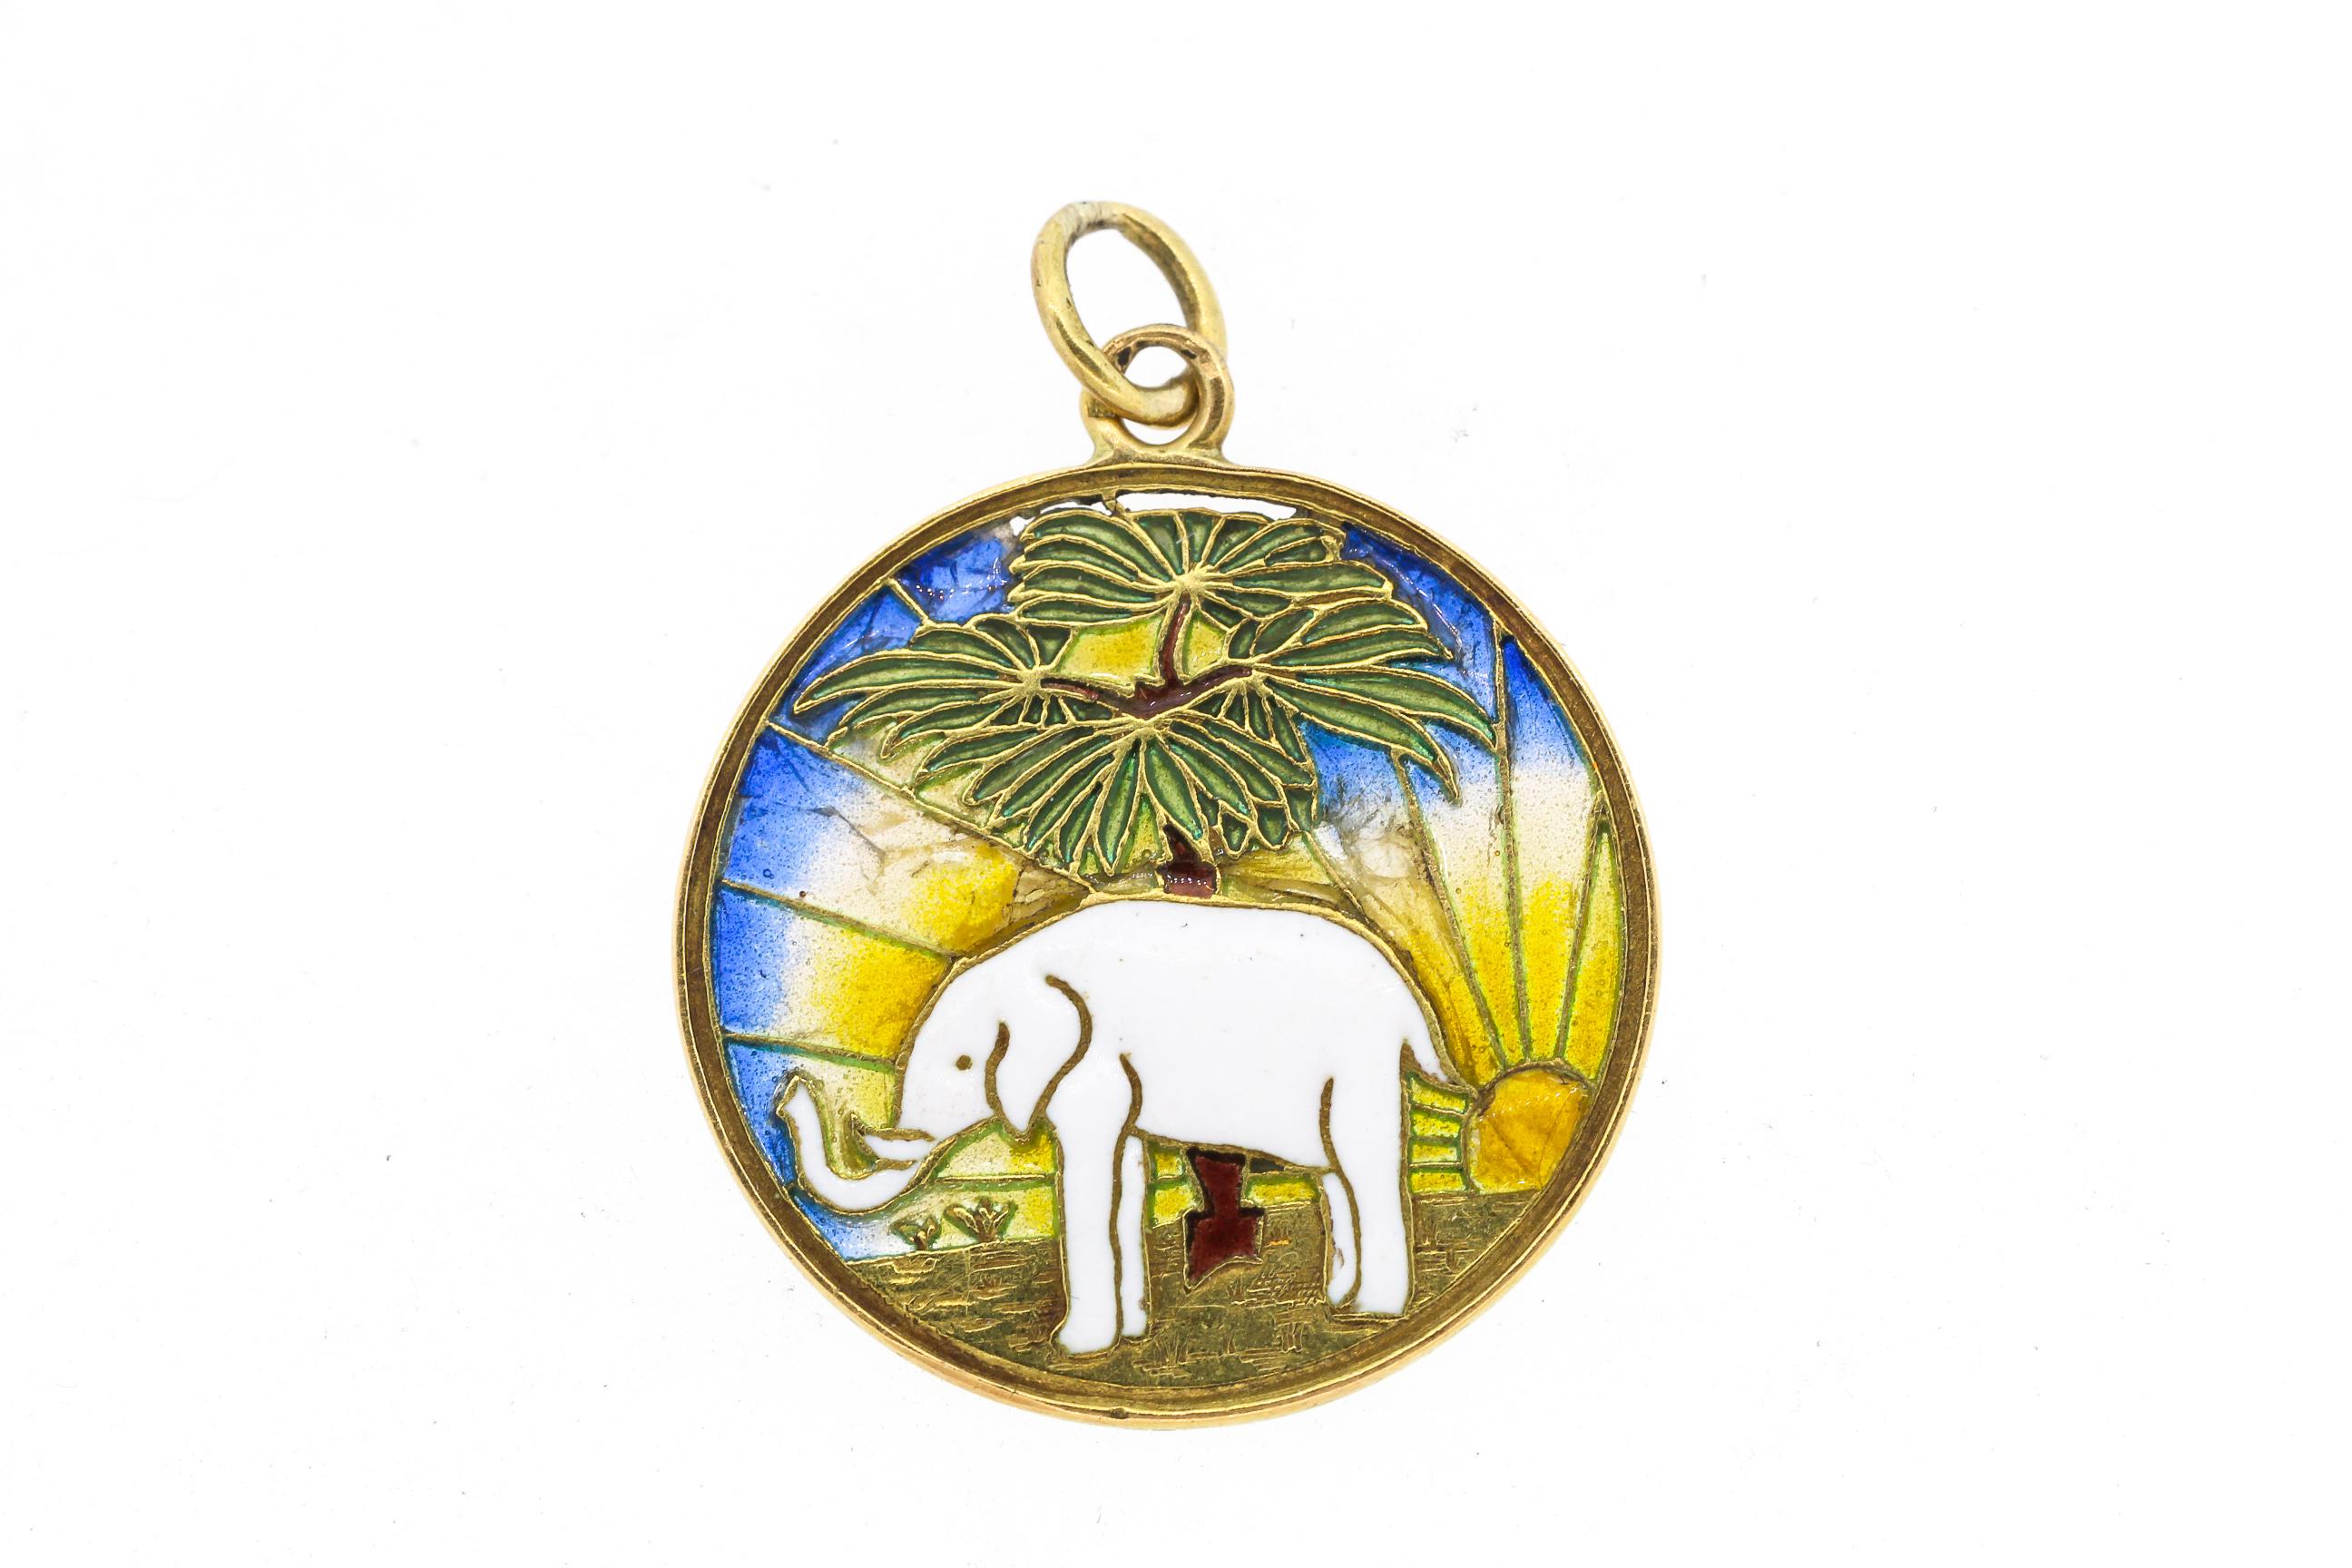 A charming vintage 18k yellow gold and enamel elephant charm with colorful plique-a-jour background circa 1950. The charm has French hallmarks. The elephant has its trunk held up which is a symbol of good luck. The charm is double sided, so the